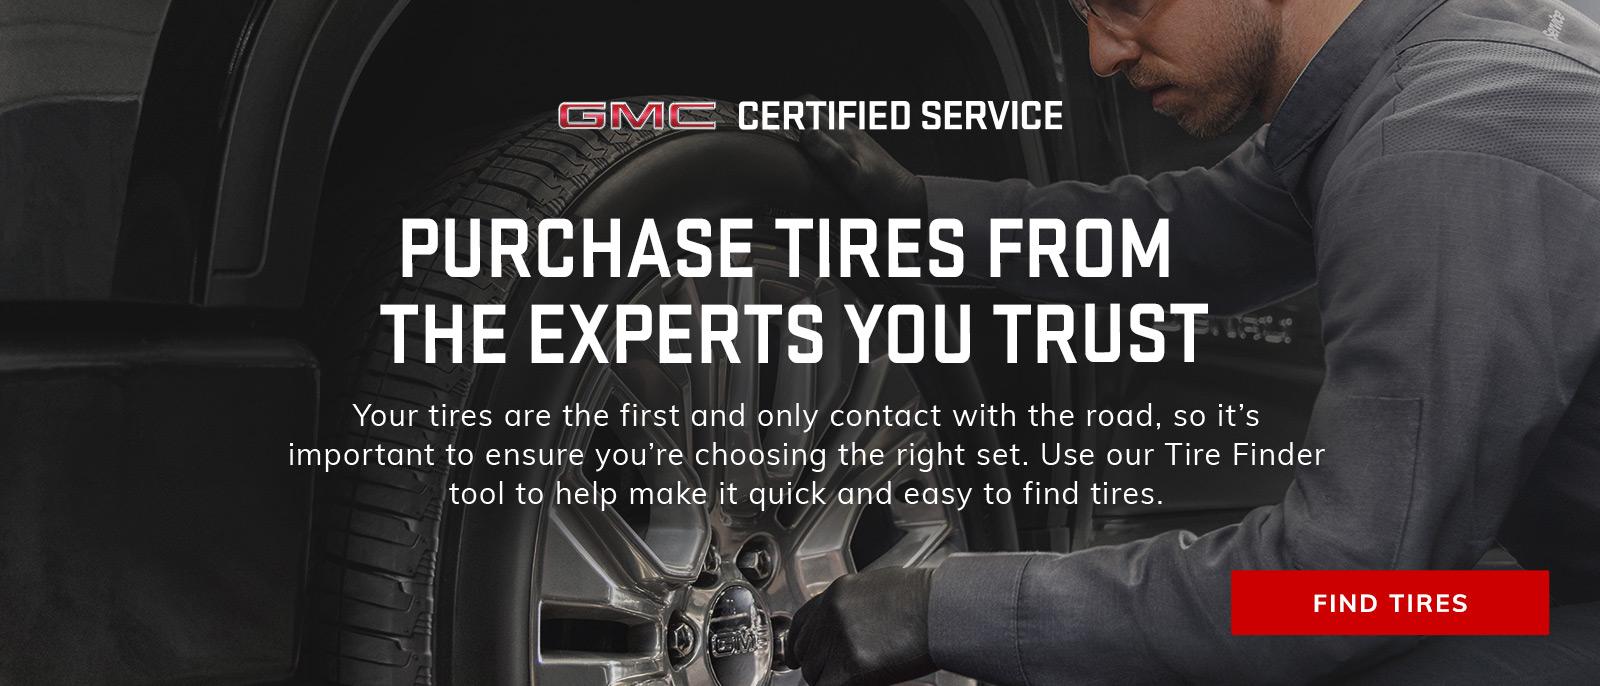 Purchase Tires from the experts you trust